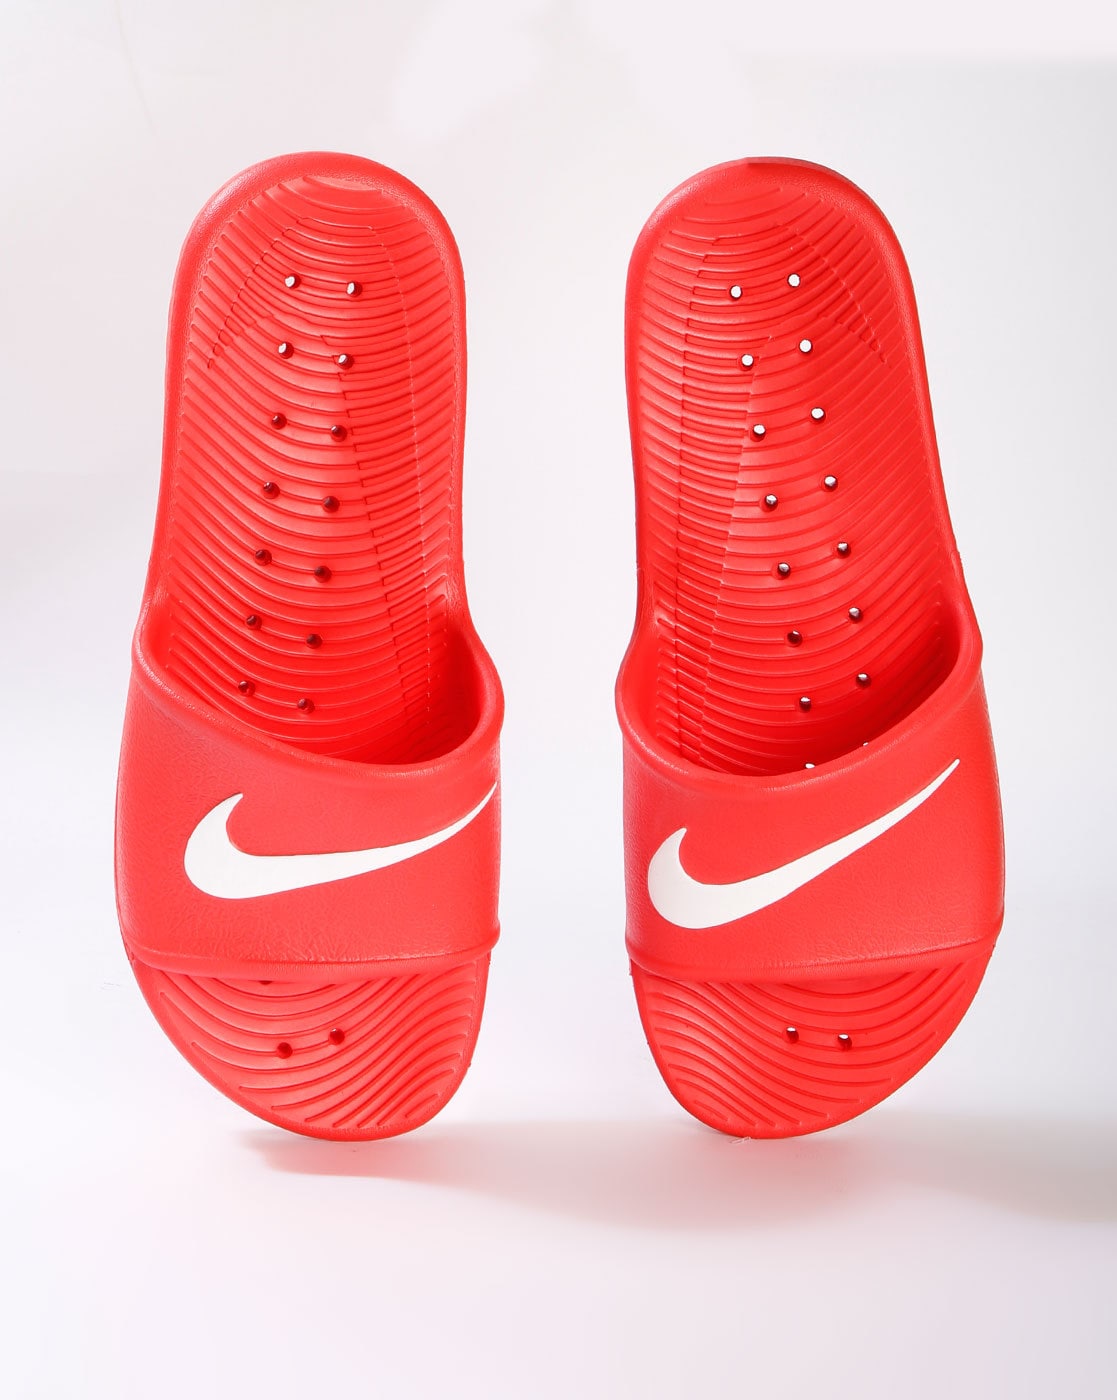 nike slides red and white